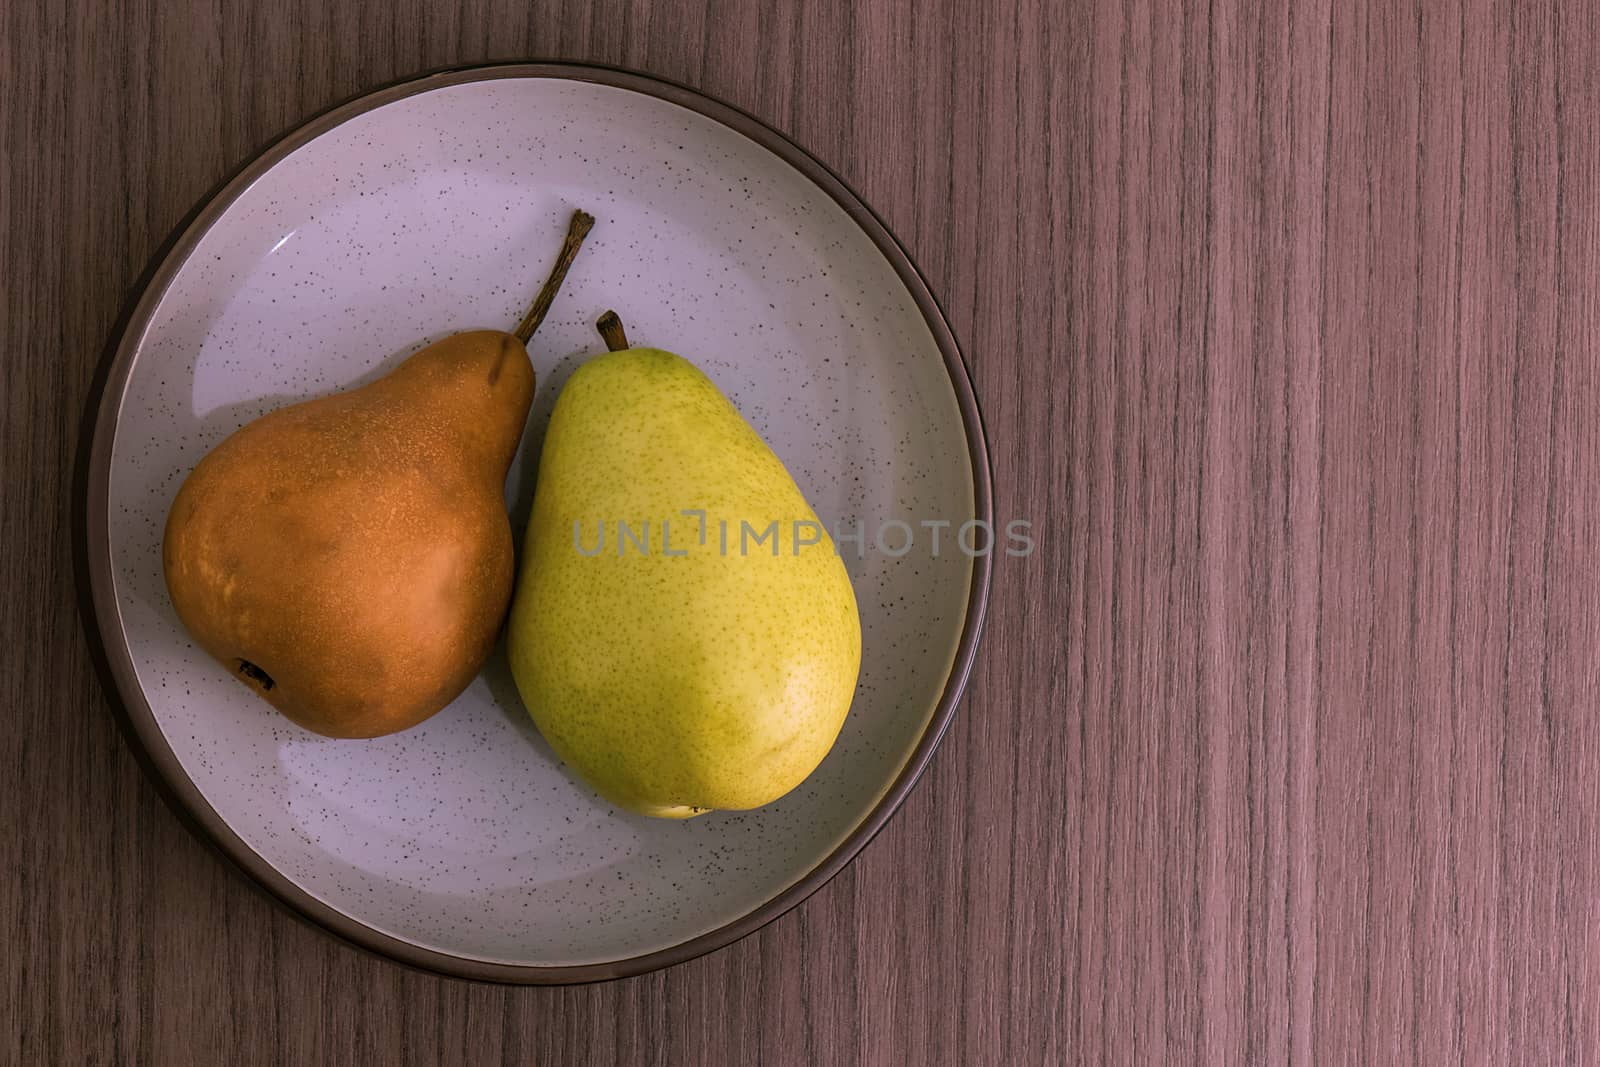 A bowl with a golden pear and a green pear